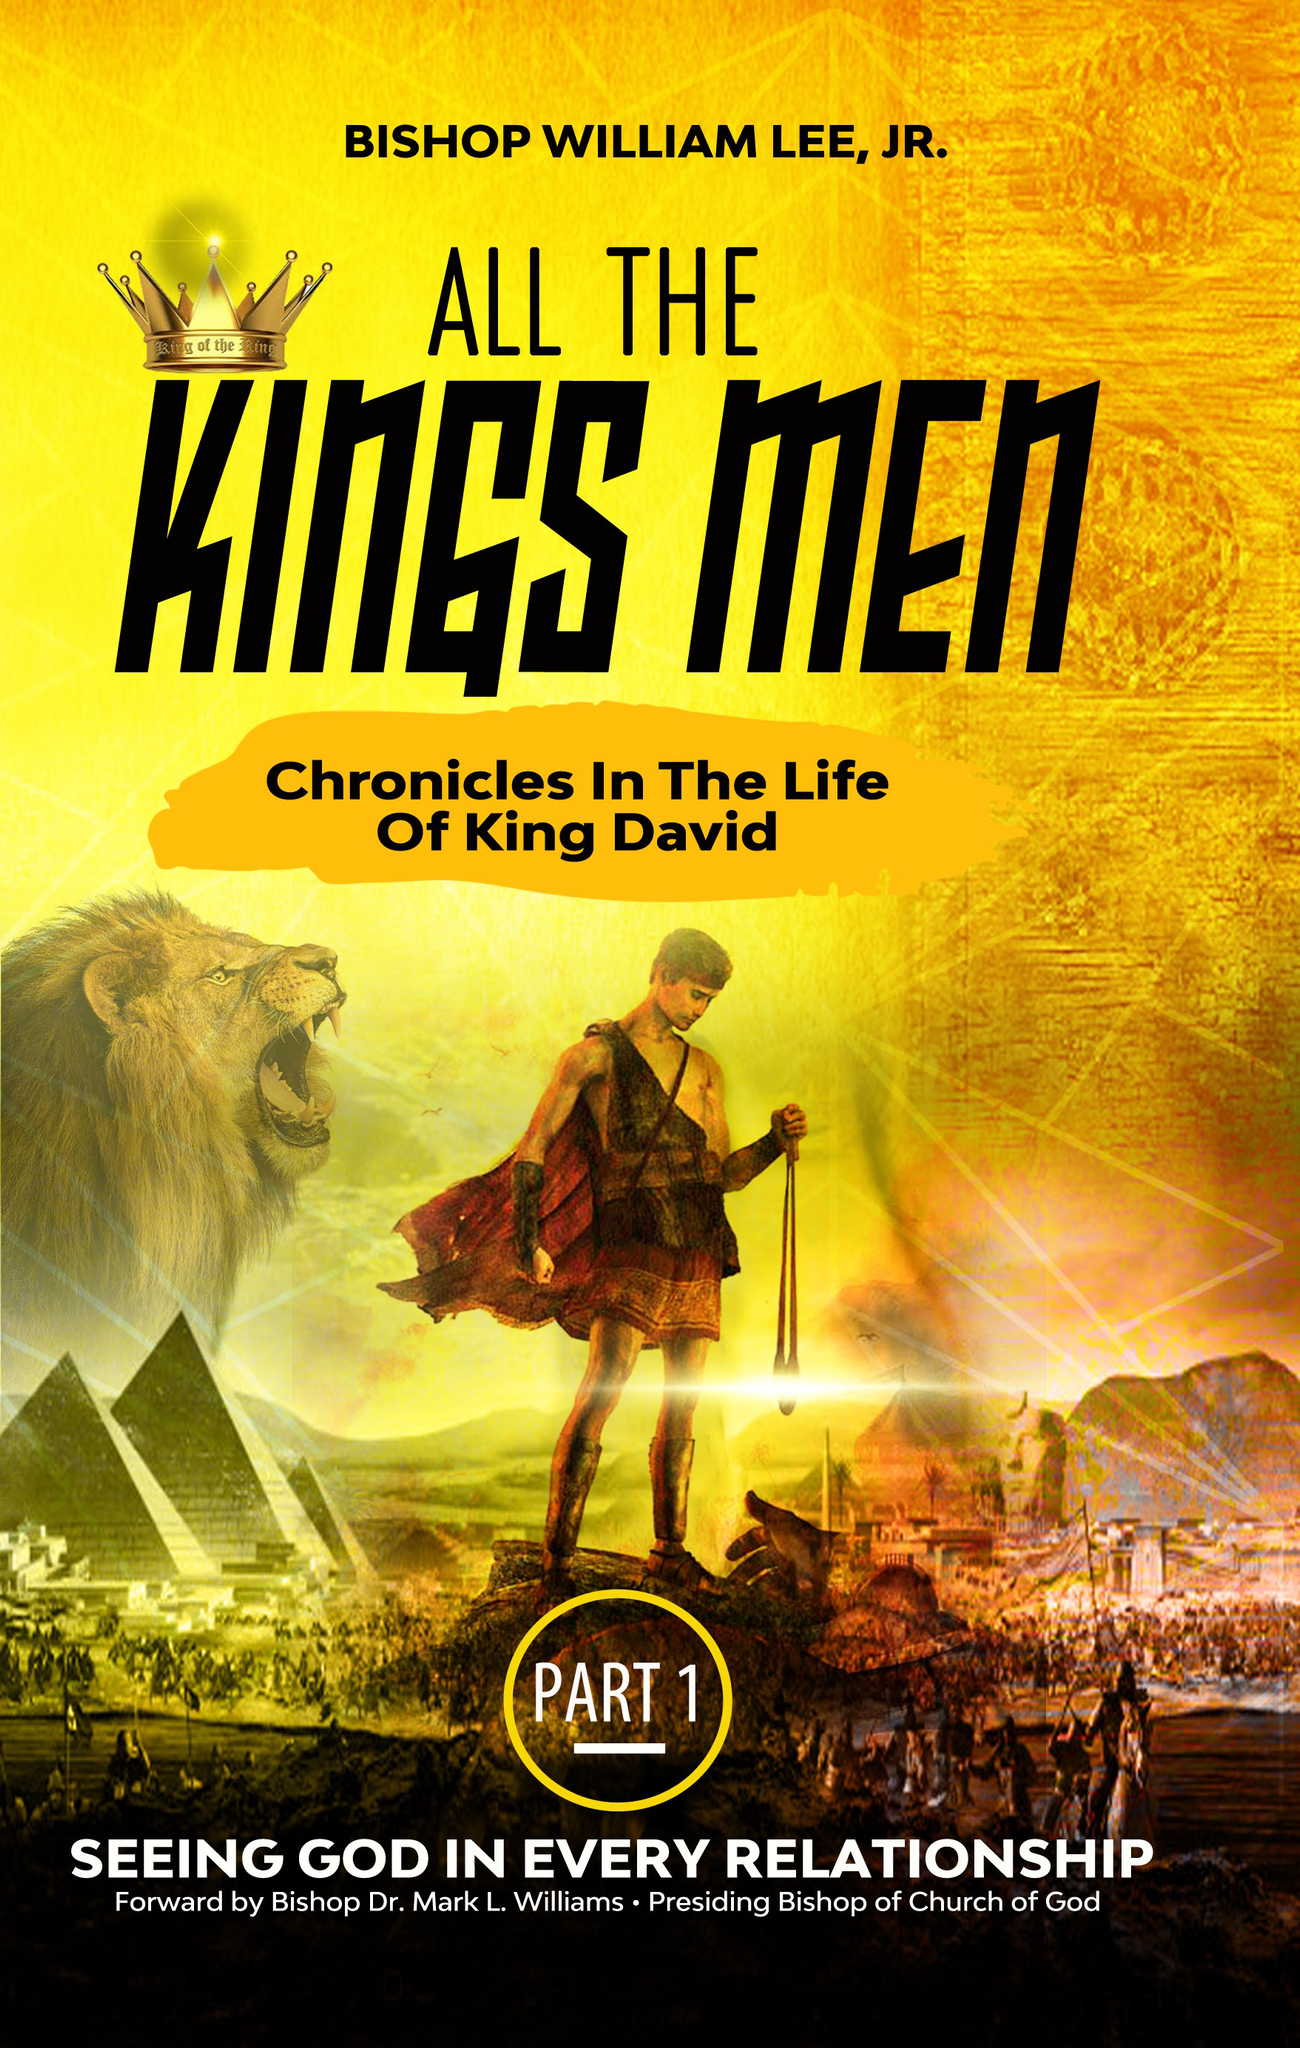 ALL THE KING’S MEN: Chronicles In The Life of King David